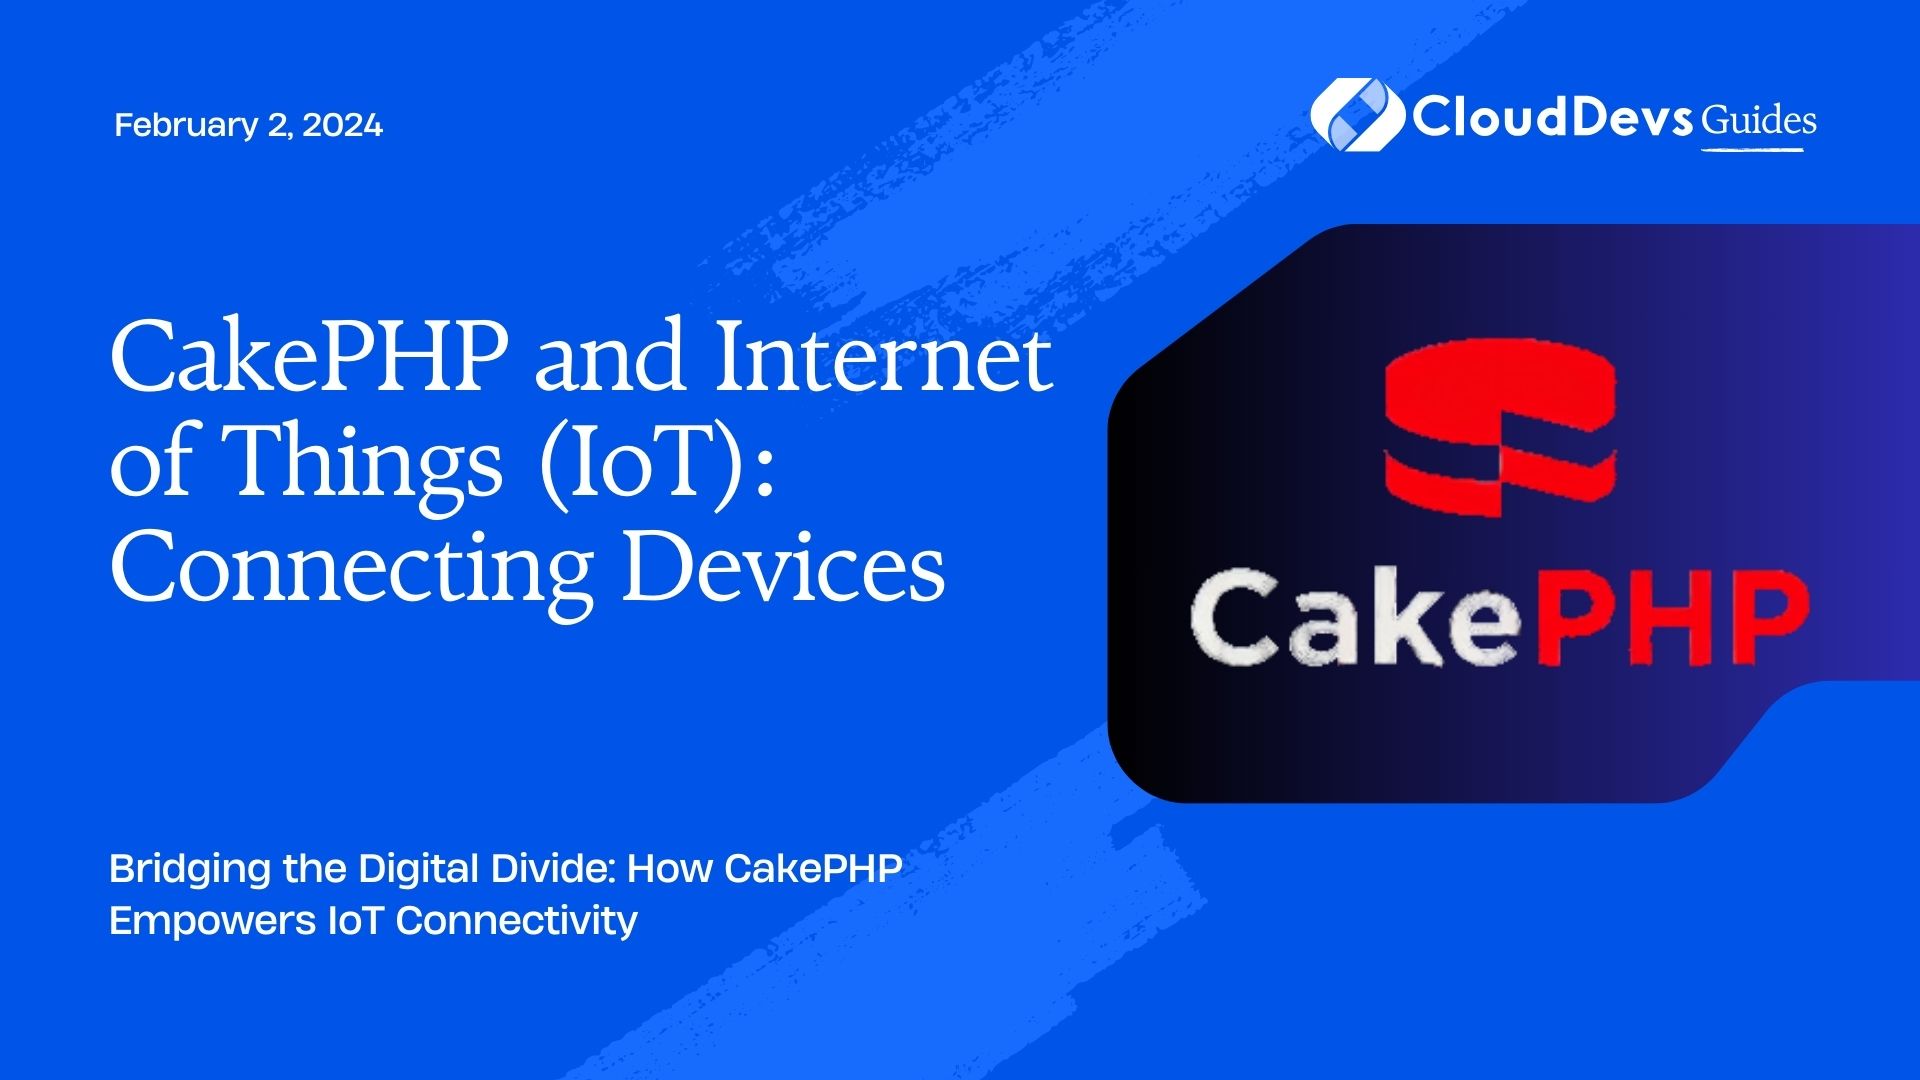 CakePHP and Internet of Things (IoT): Connecting Devices